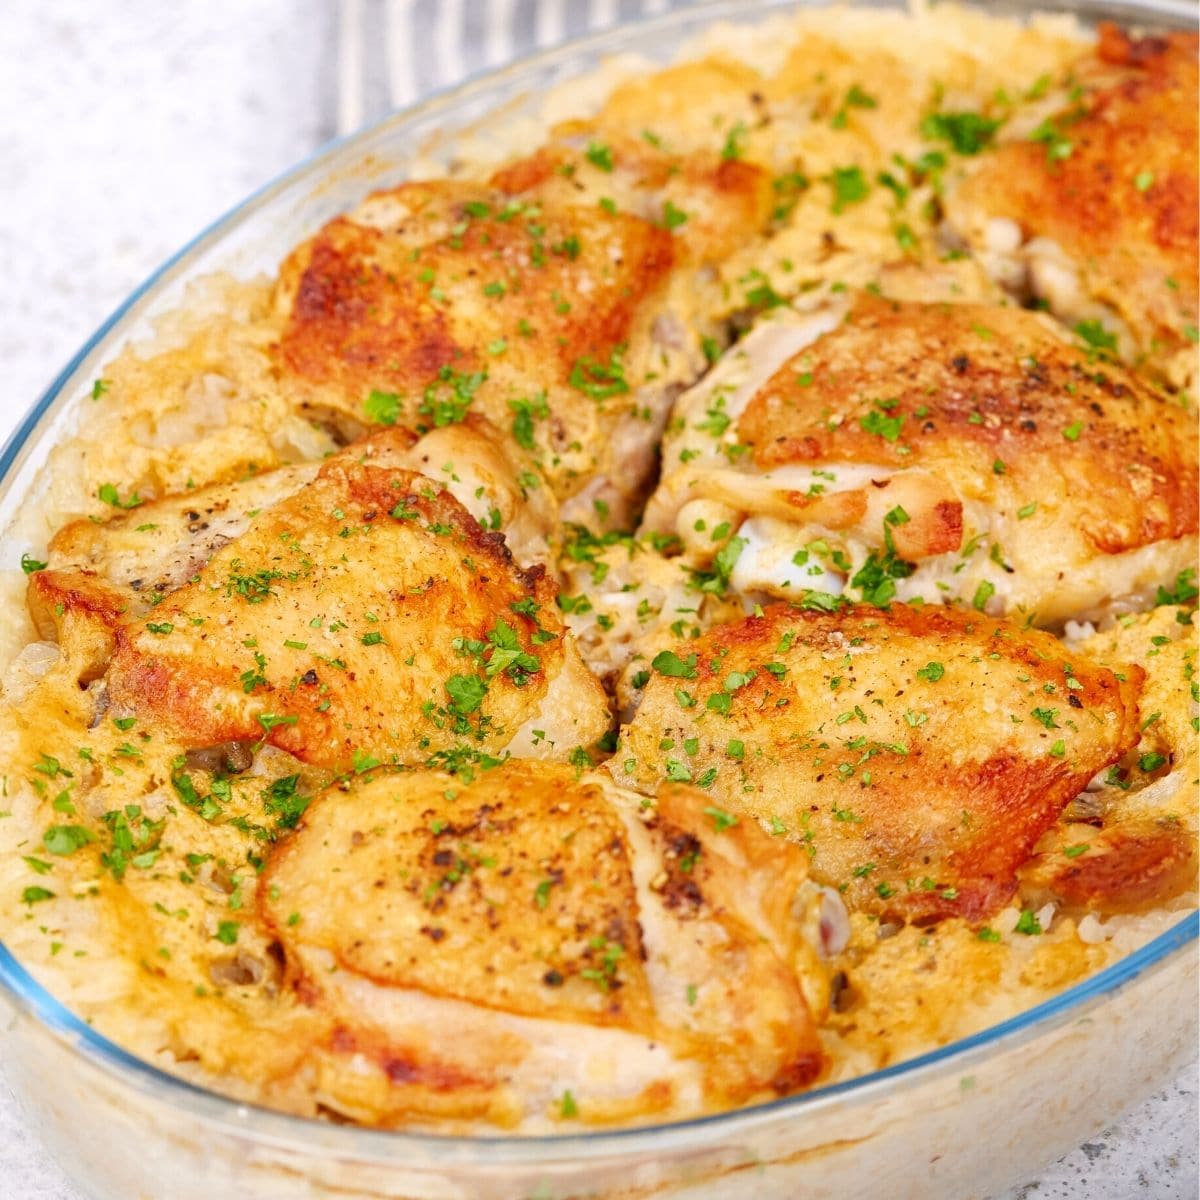 Baked chicken coconut and rice casserole in a glass dish.